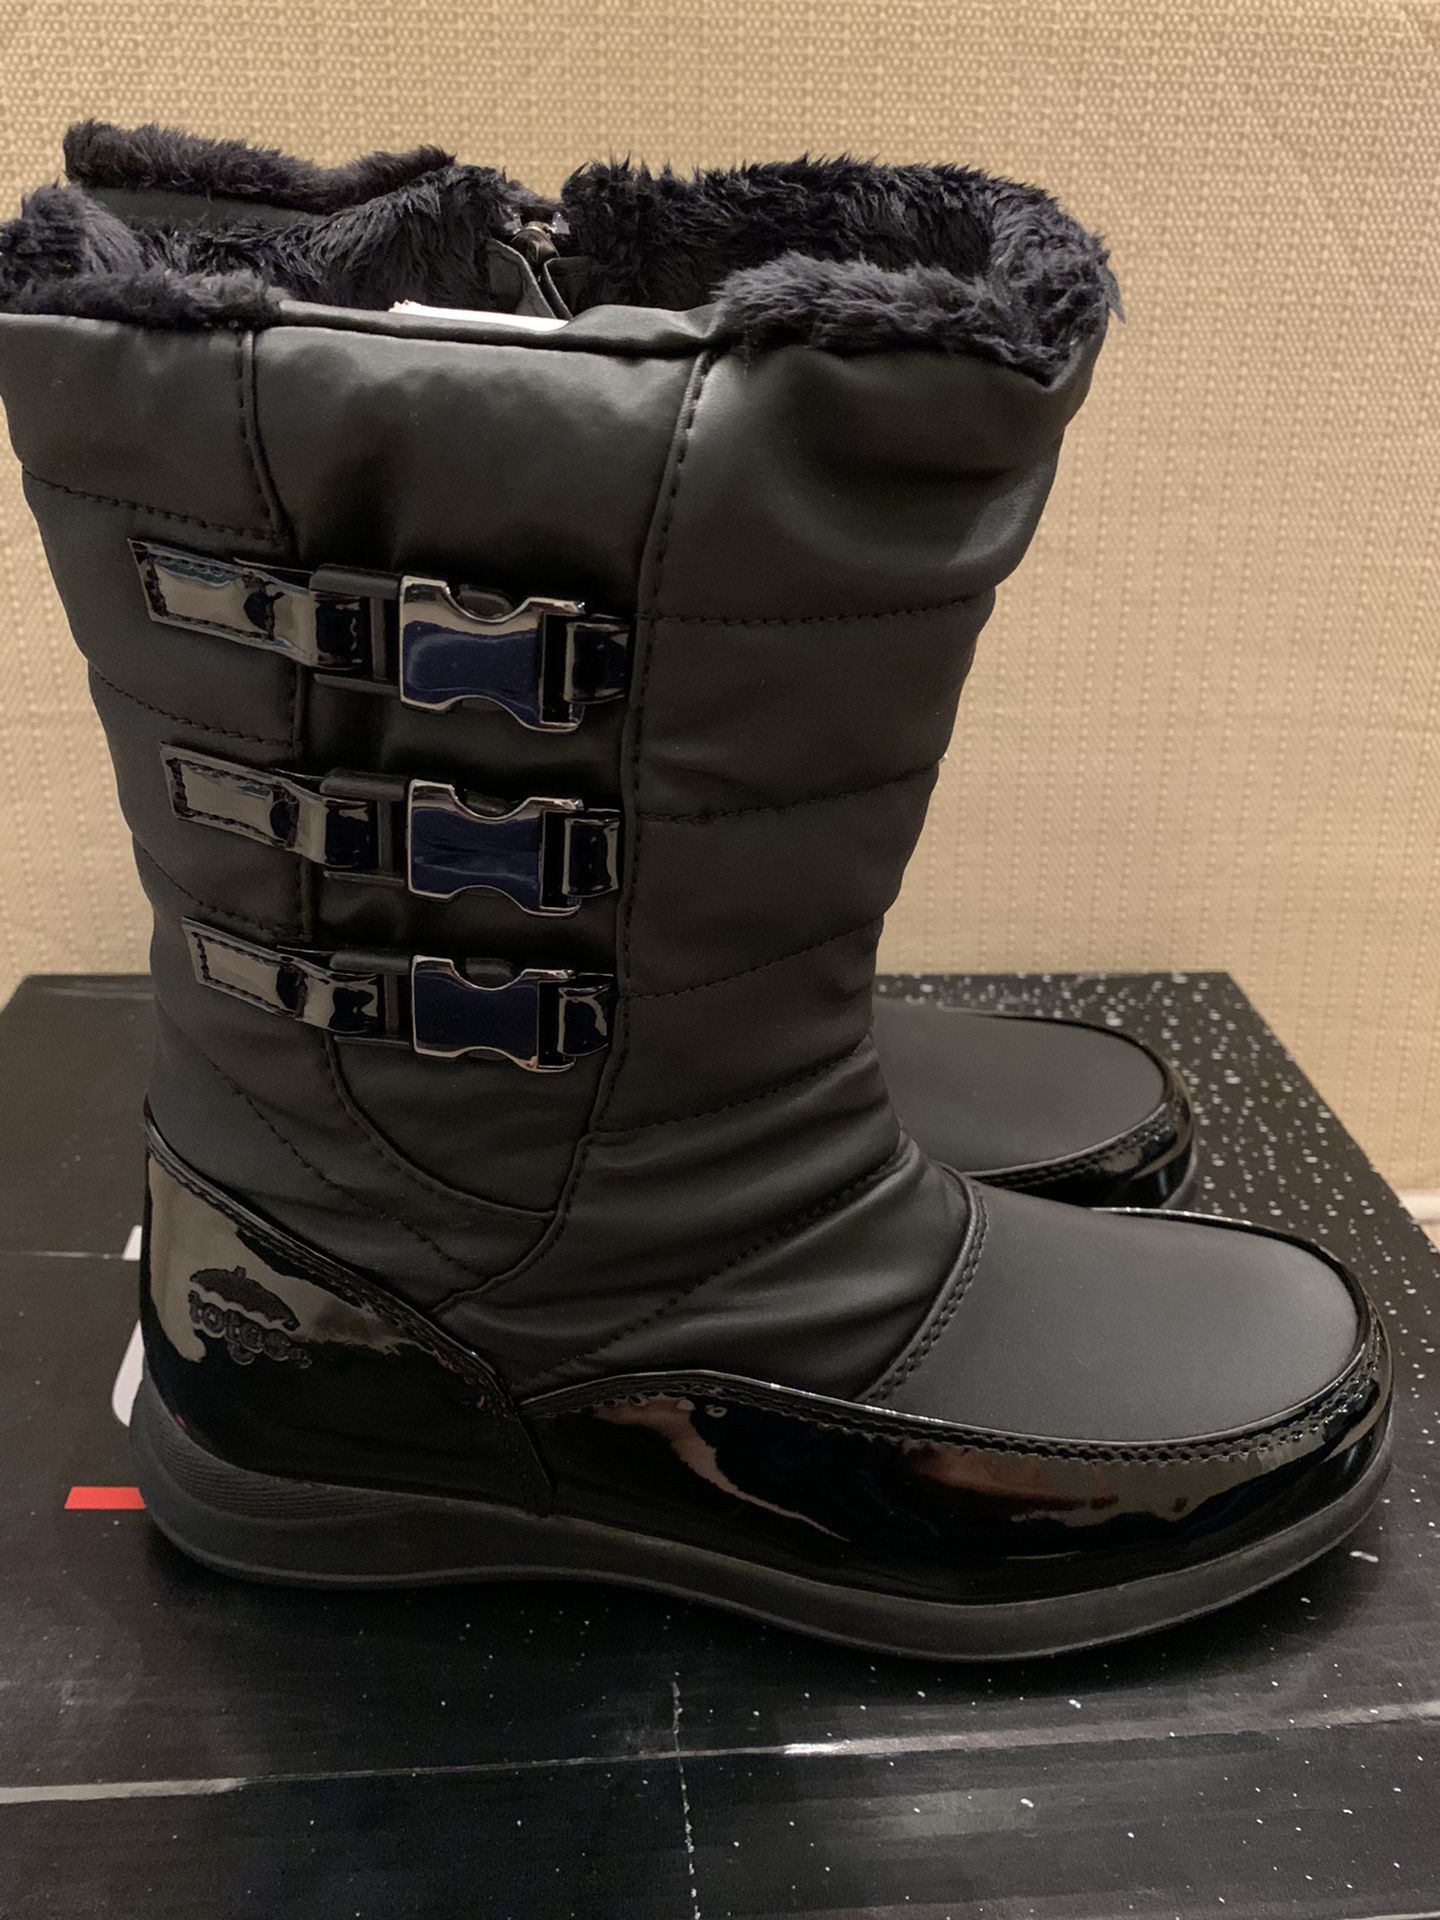 Women’s Totes Snow Boots - Size 8